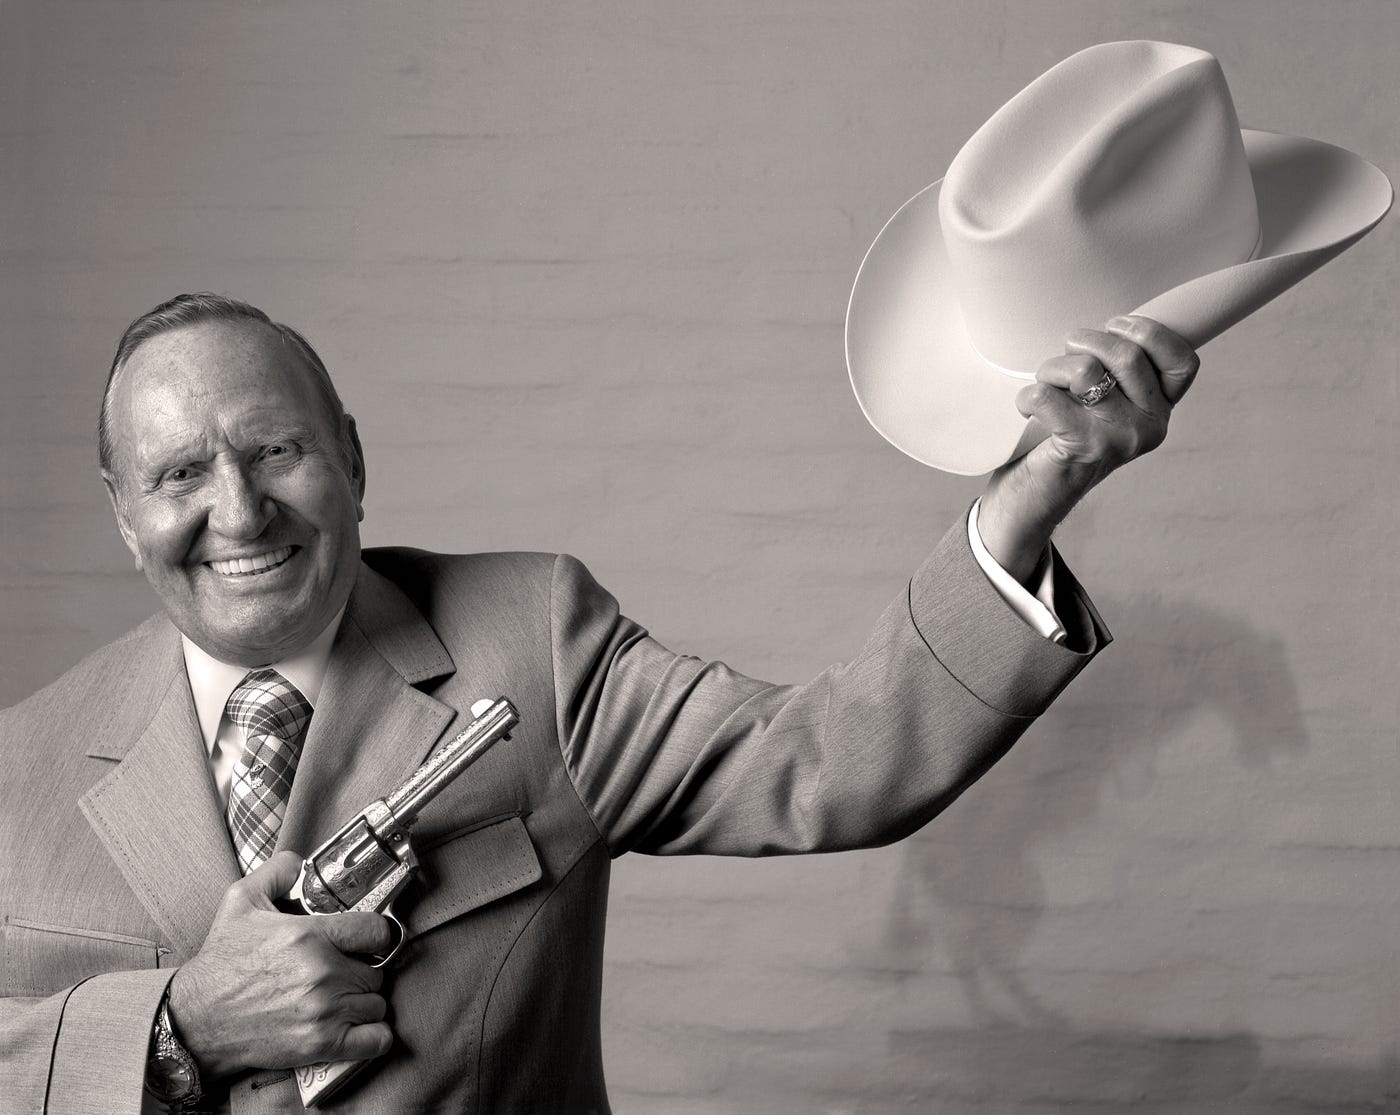 17 Facts About Gene Autry - Facts.net